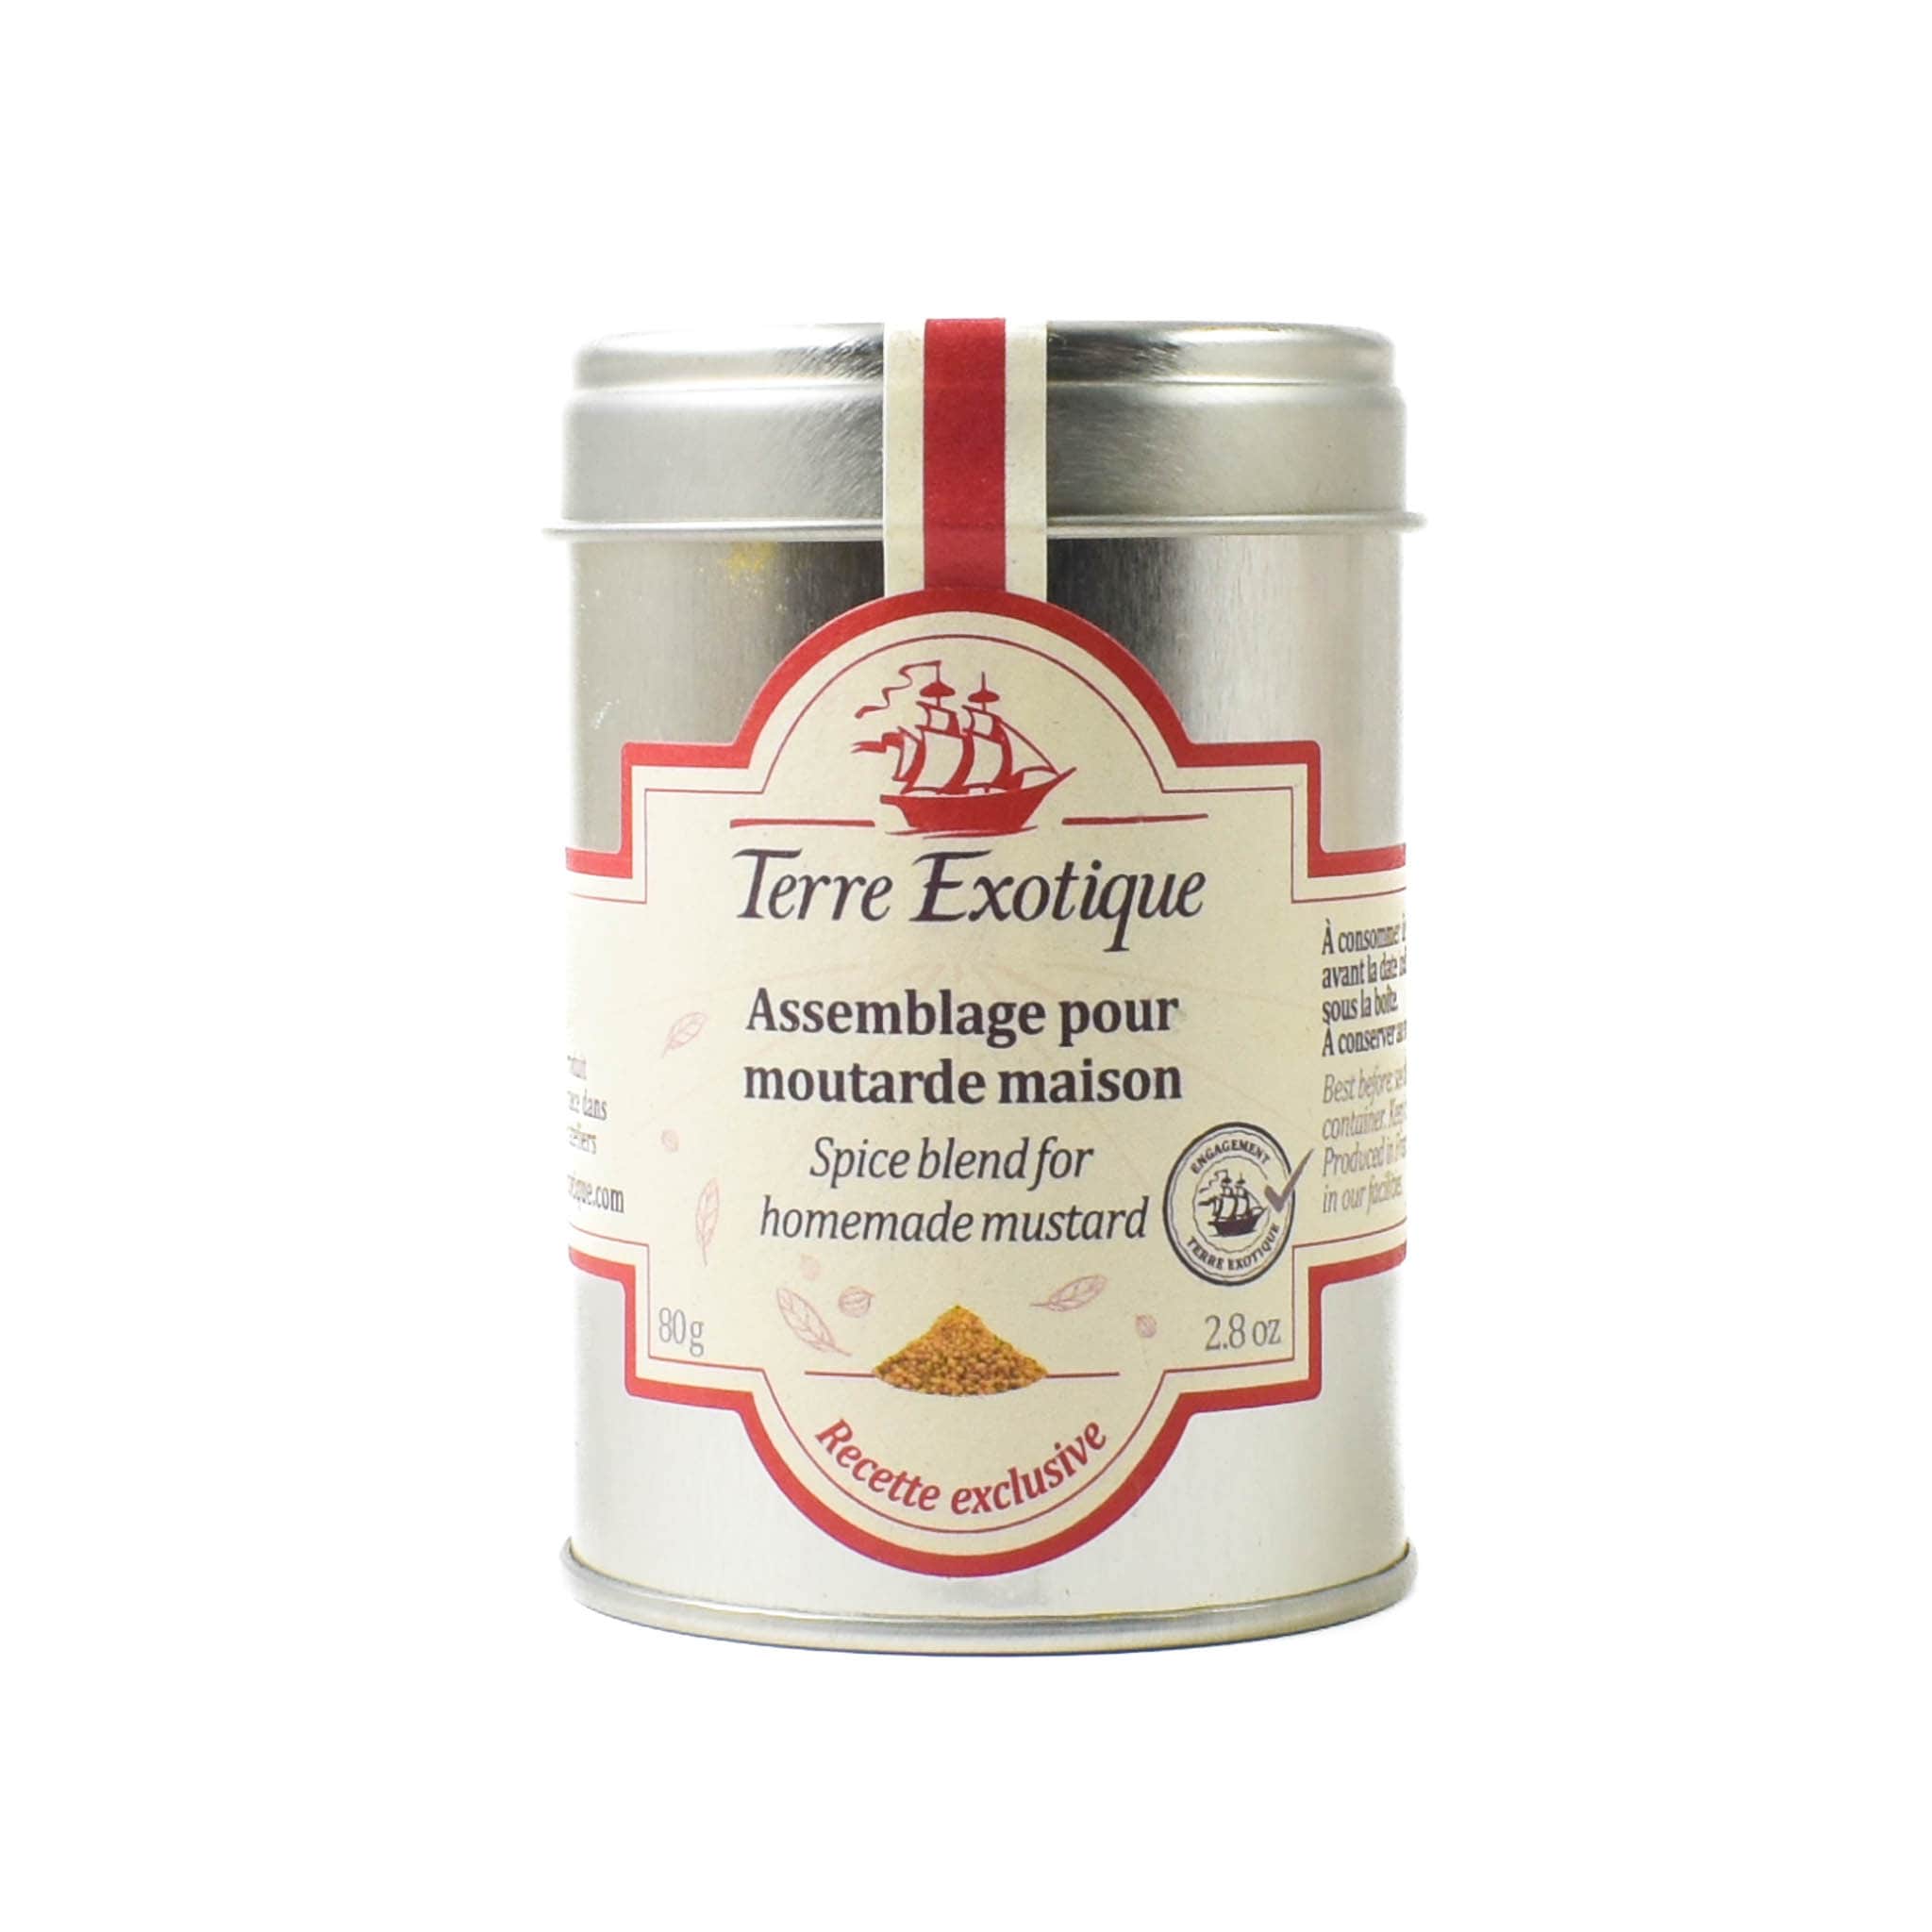 Terre Exotique Spice Blend for Homemade Mustard, 80g